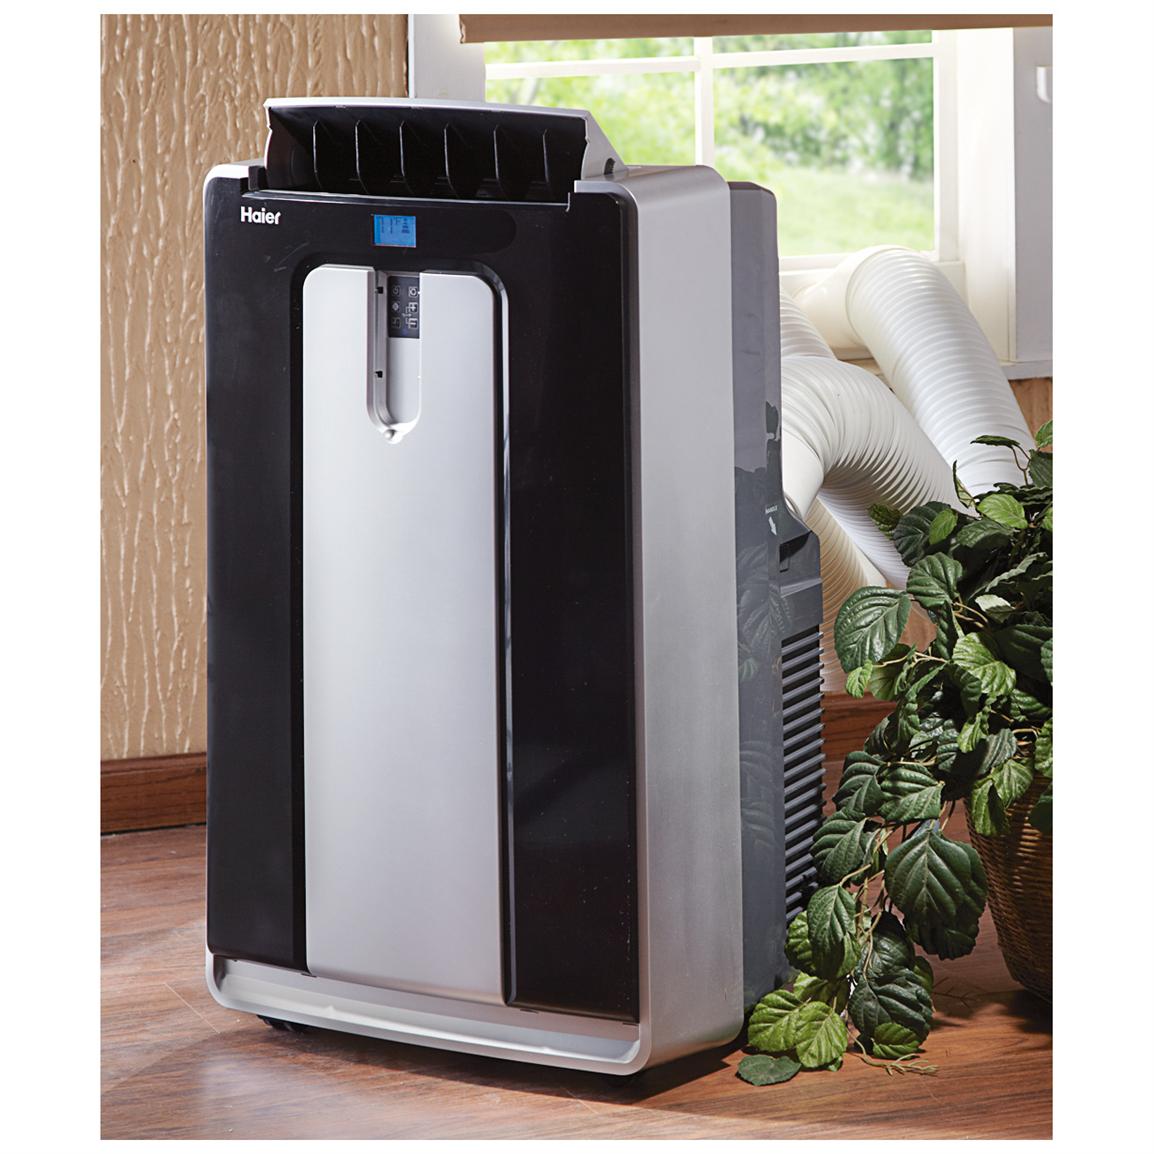 Haier 14 000 Btu Portable Room Air Conditioner 590946 Air Conditioners Fans At Sportsman S Guide